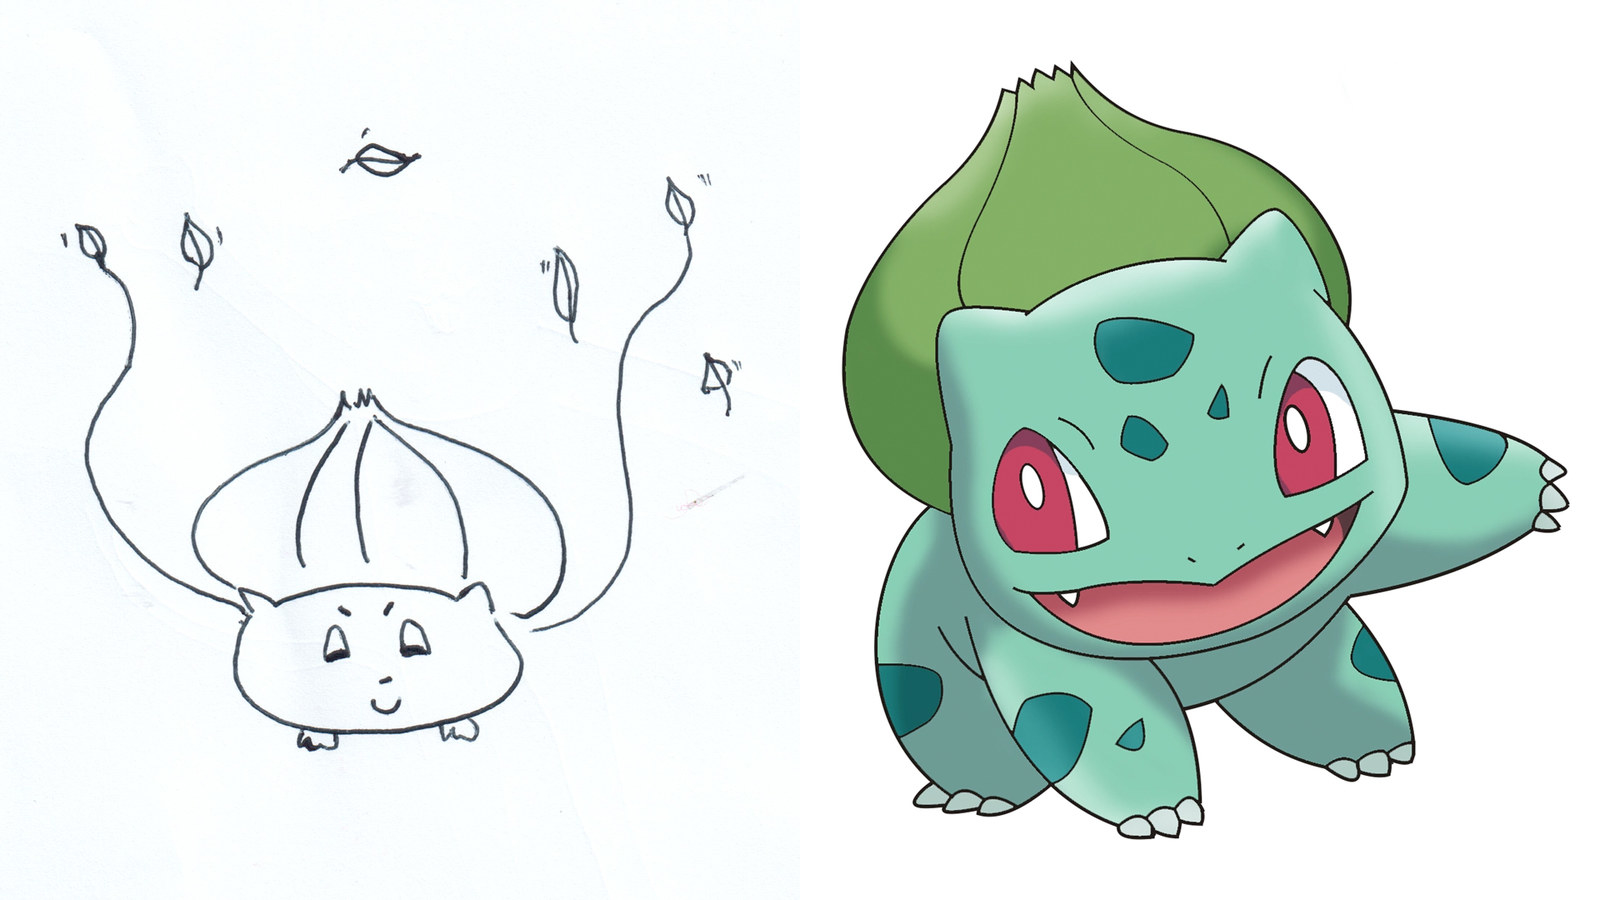 3. Okay, I've got to admit it this Bulbasaur is pretty spot-on. 